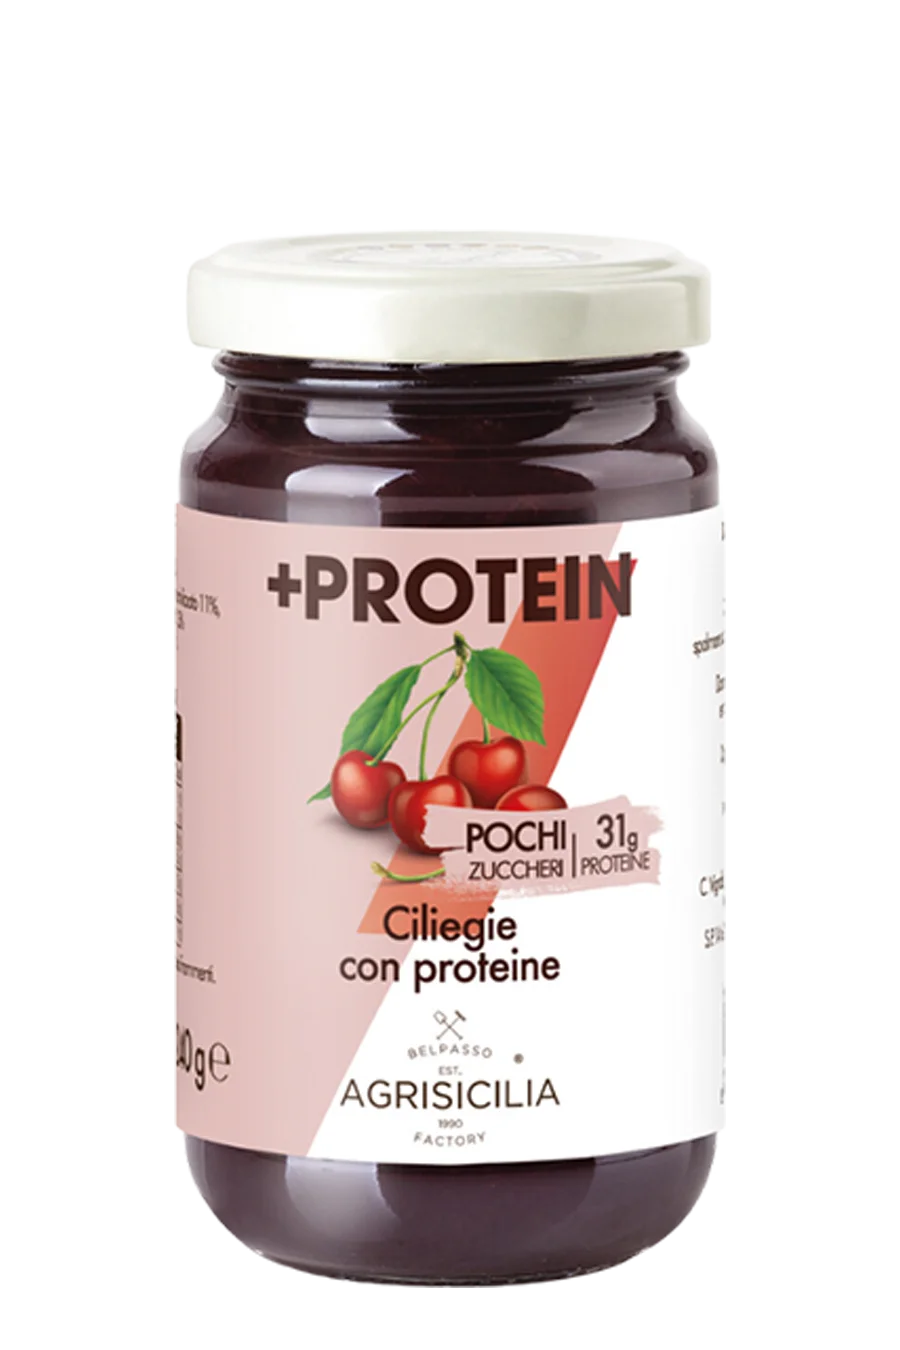 Jar of Cherry Preparation of Agrisicilia with Protein